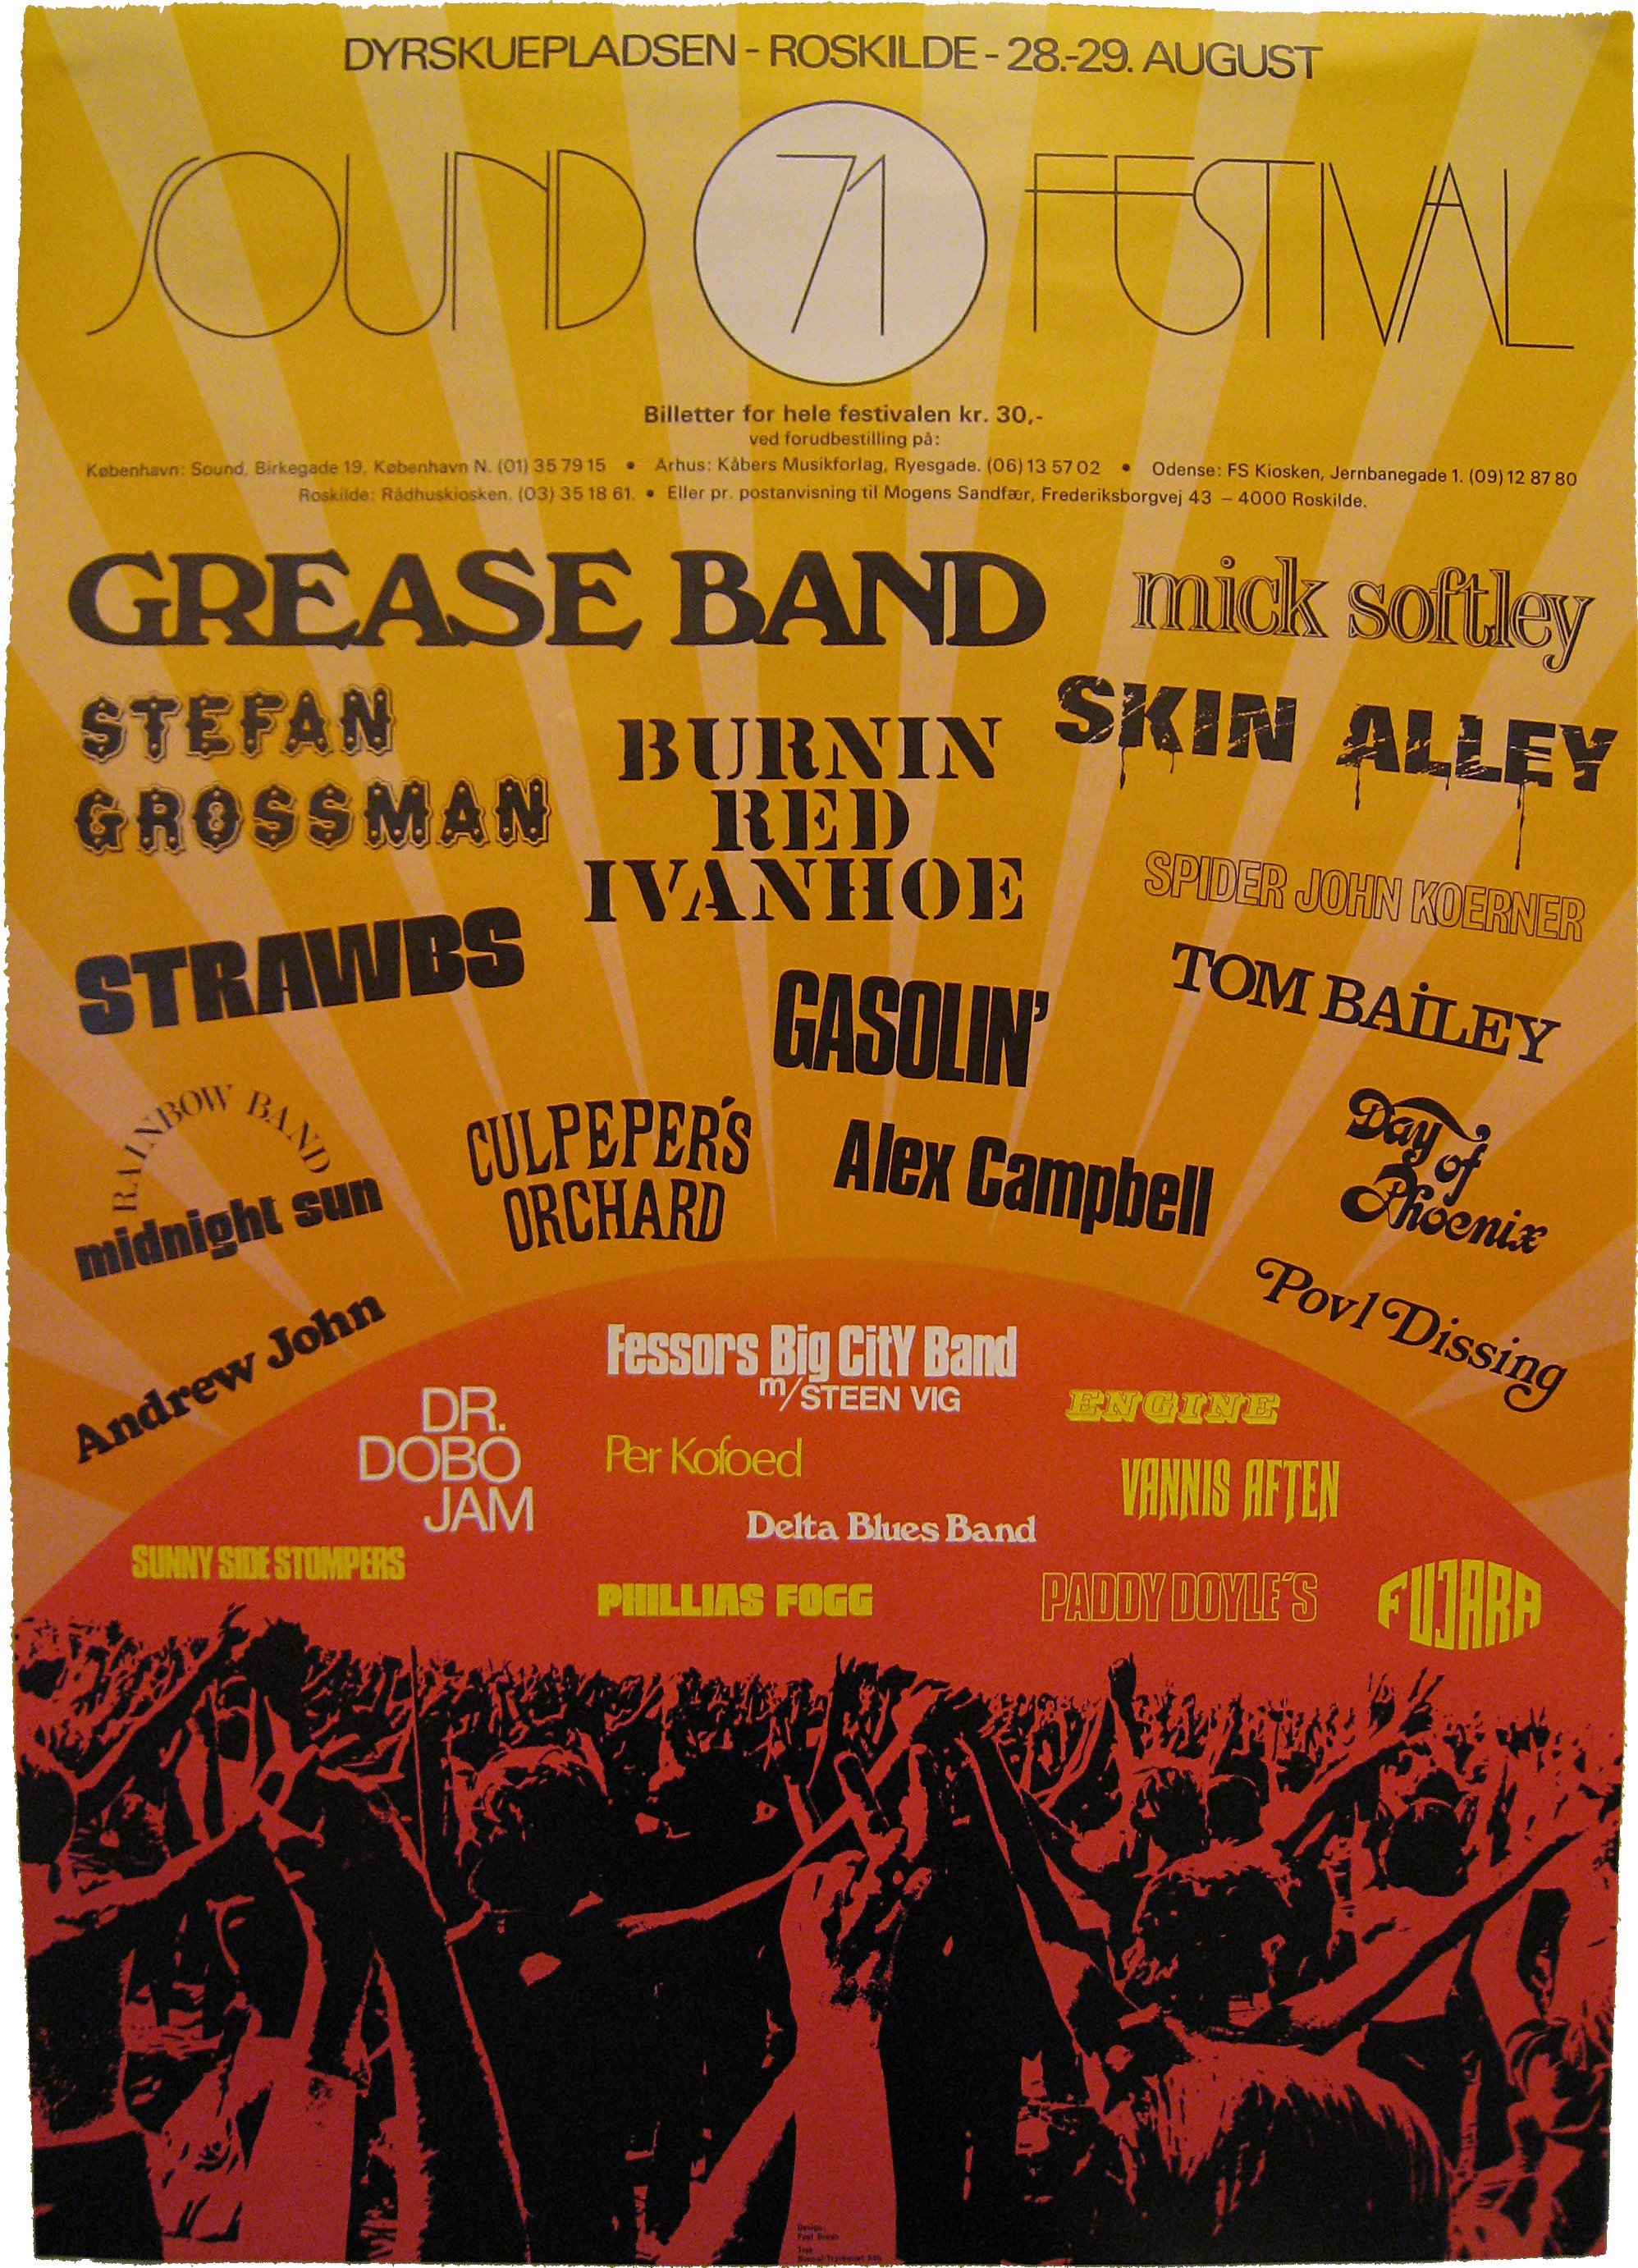 Enhed kanal Cosmic Roskilde Festival on Twitter: "Happy birthday to Roskilde Festival! Today,  47 years ago, the doors opened to the first edition of Roskilde Festival  (back then called Sound Festival). Here's the poster.  https://t.co/cr6eH4gvh1" /